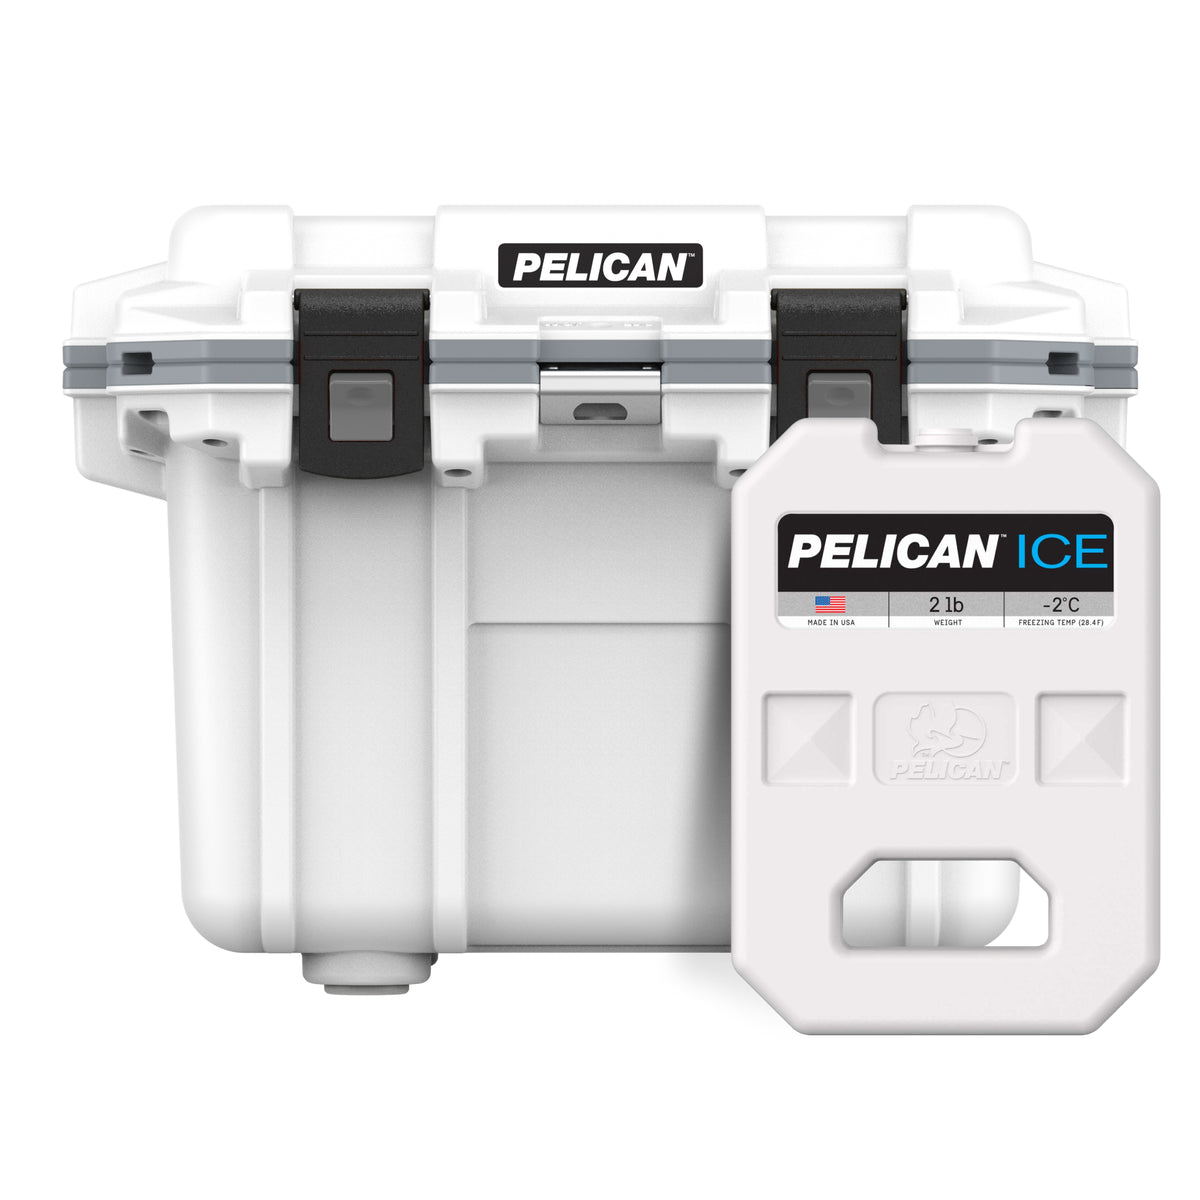 White / Grey Pelican 30QT Cooler with Pelican 2lb Ice Pack